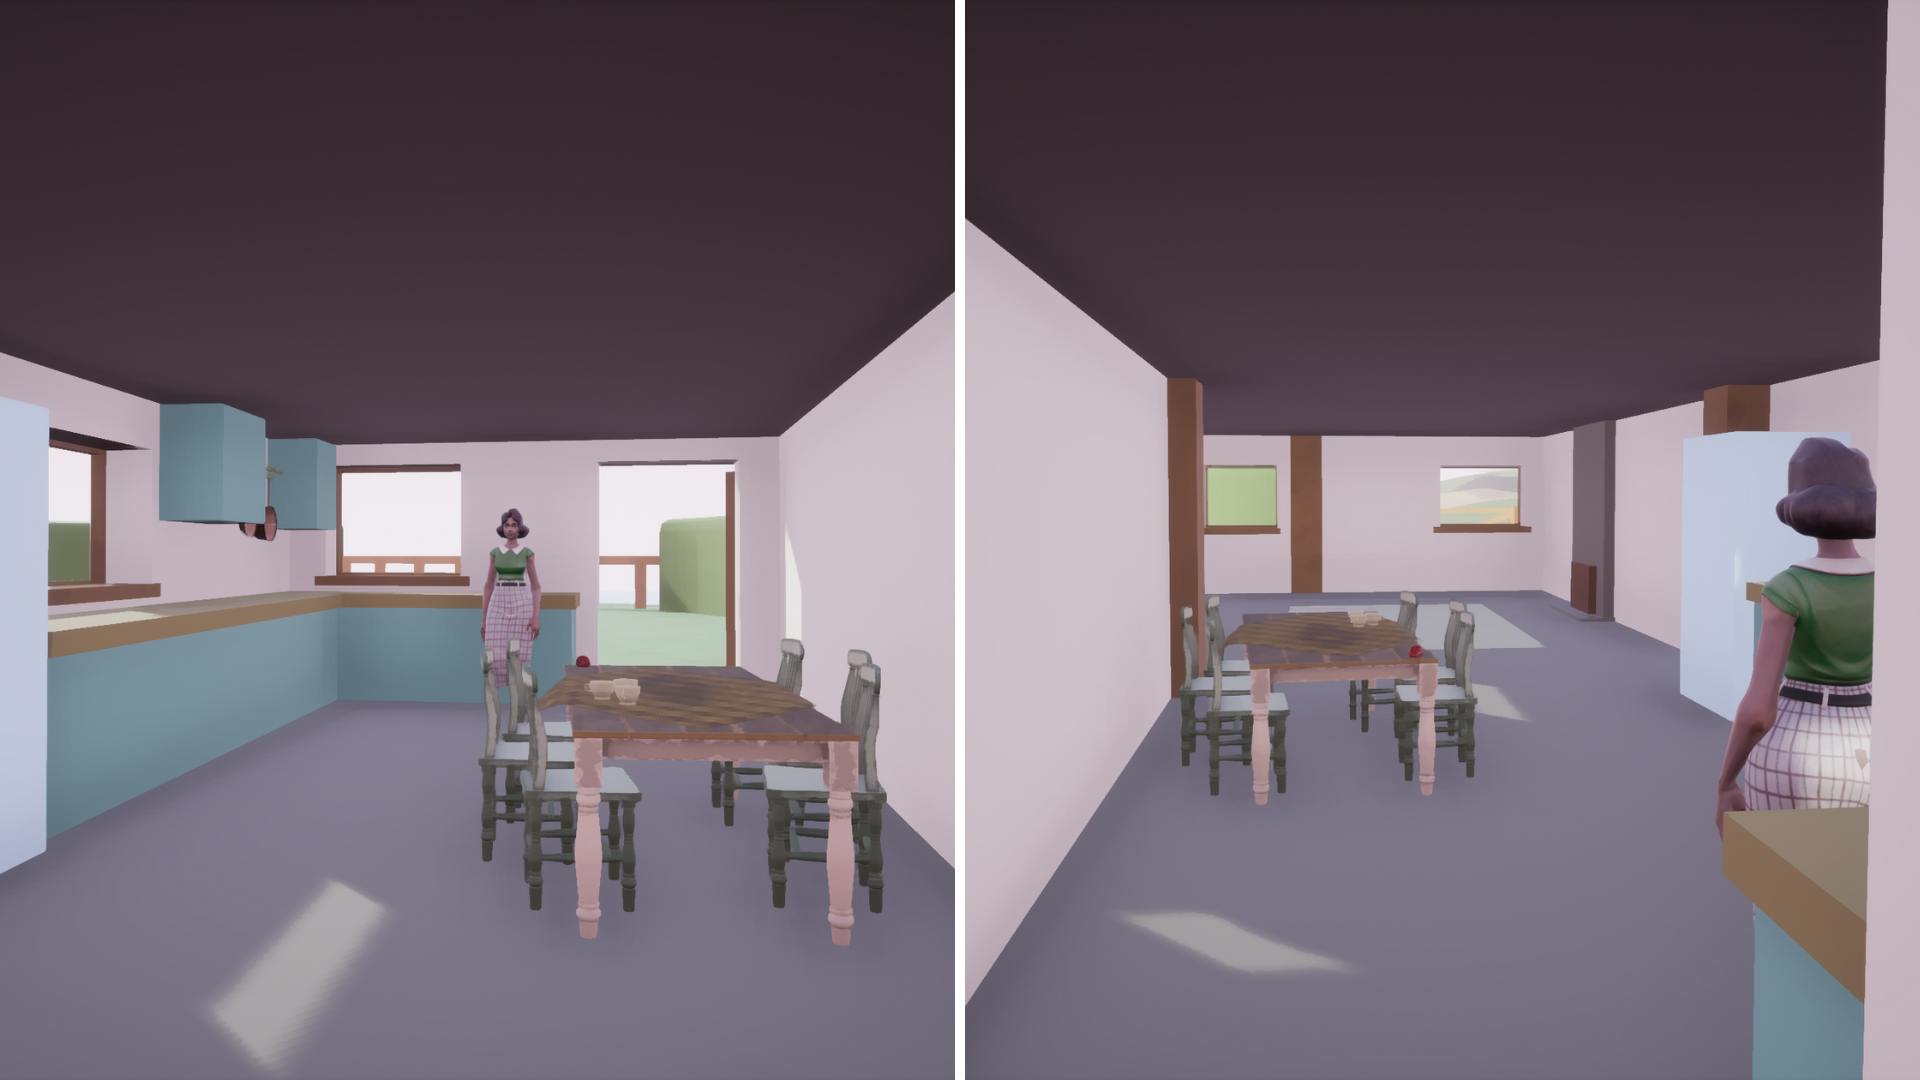 Two images of the same basic room model from different angles. The room has a brown ceiling and cream walls, a wooden table with six chairs, and blue kitchen counters along two walls. A woman in a green top and beige skirt, Phyllis, is standing in the room.